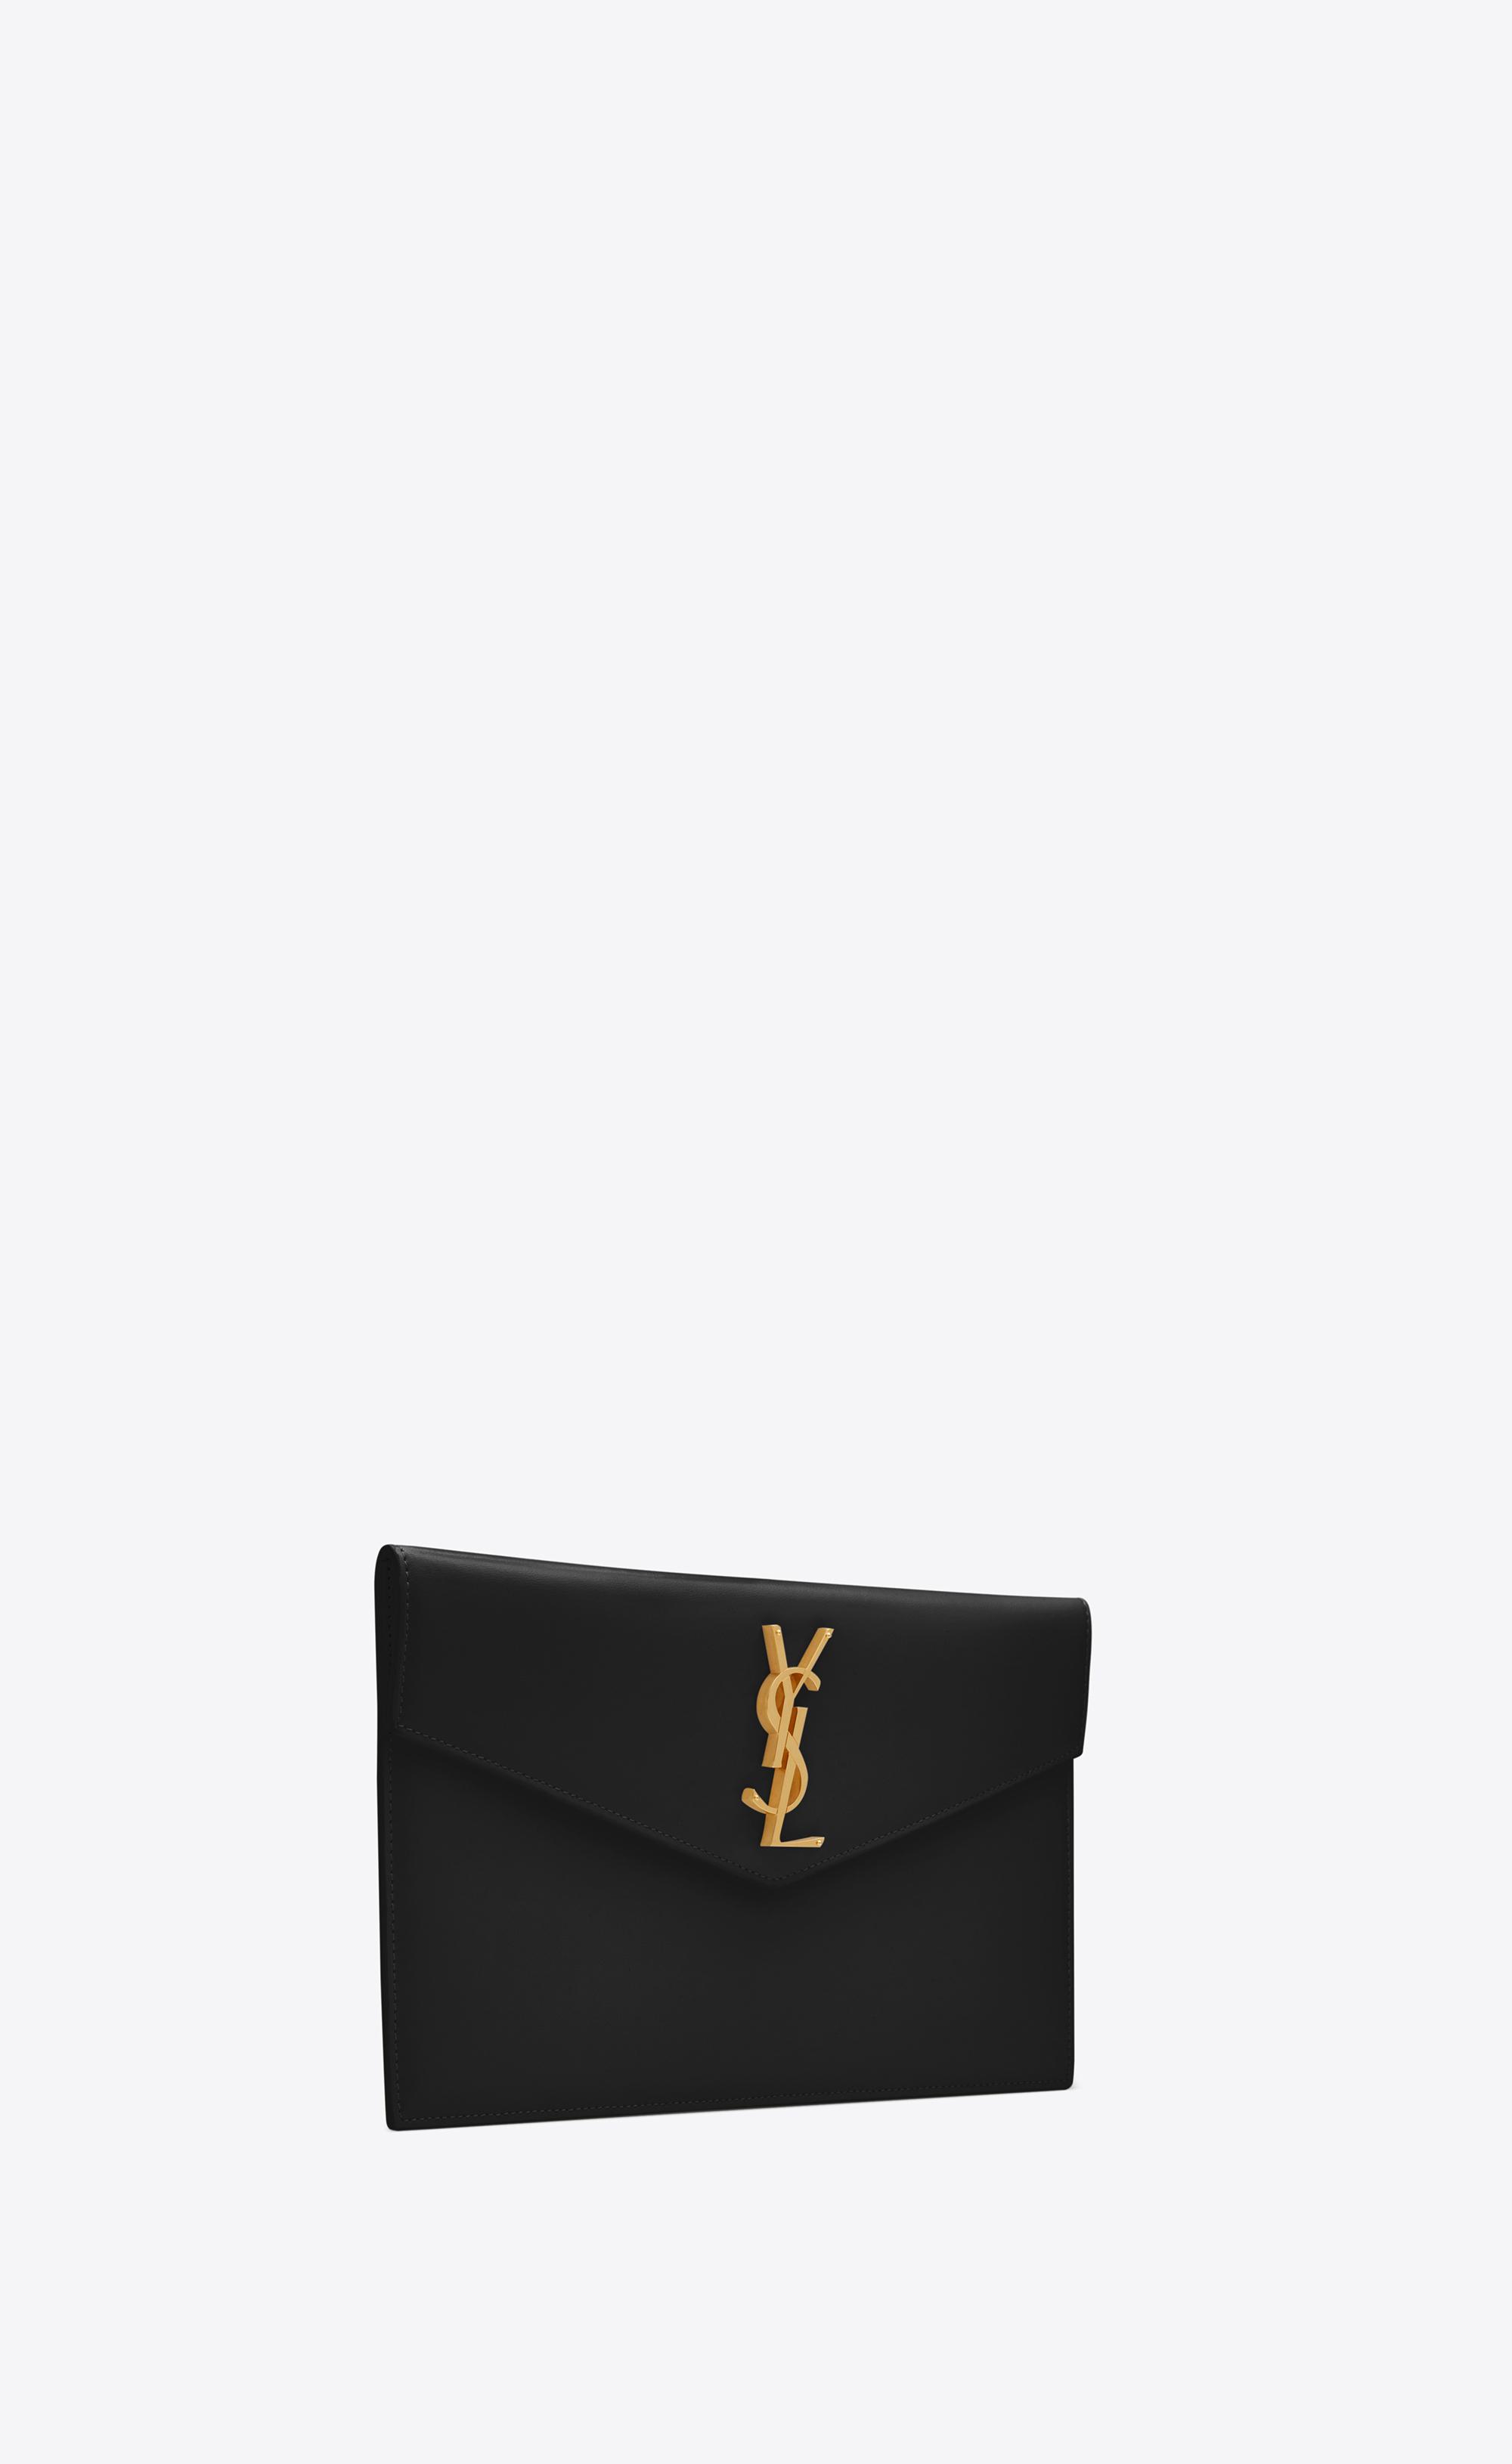 Saint Laurent Uptown Pouch In Shiny Smooth Leather in Black - Lyst